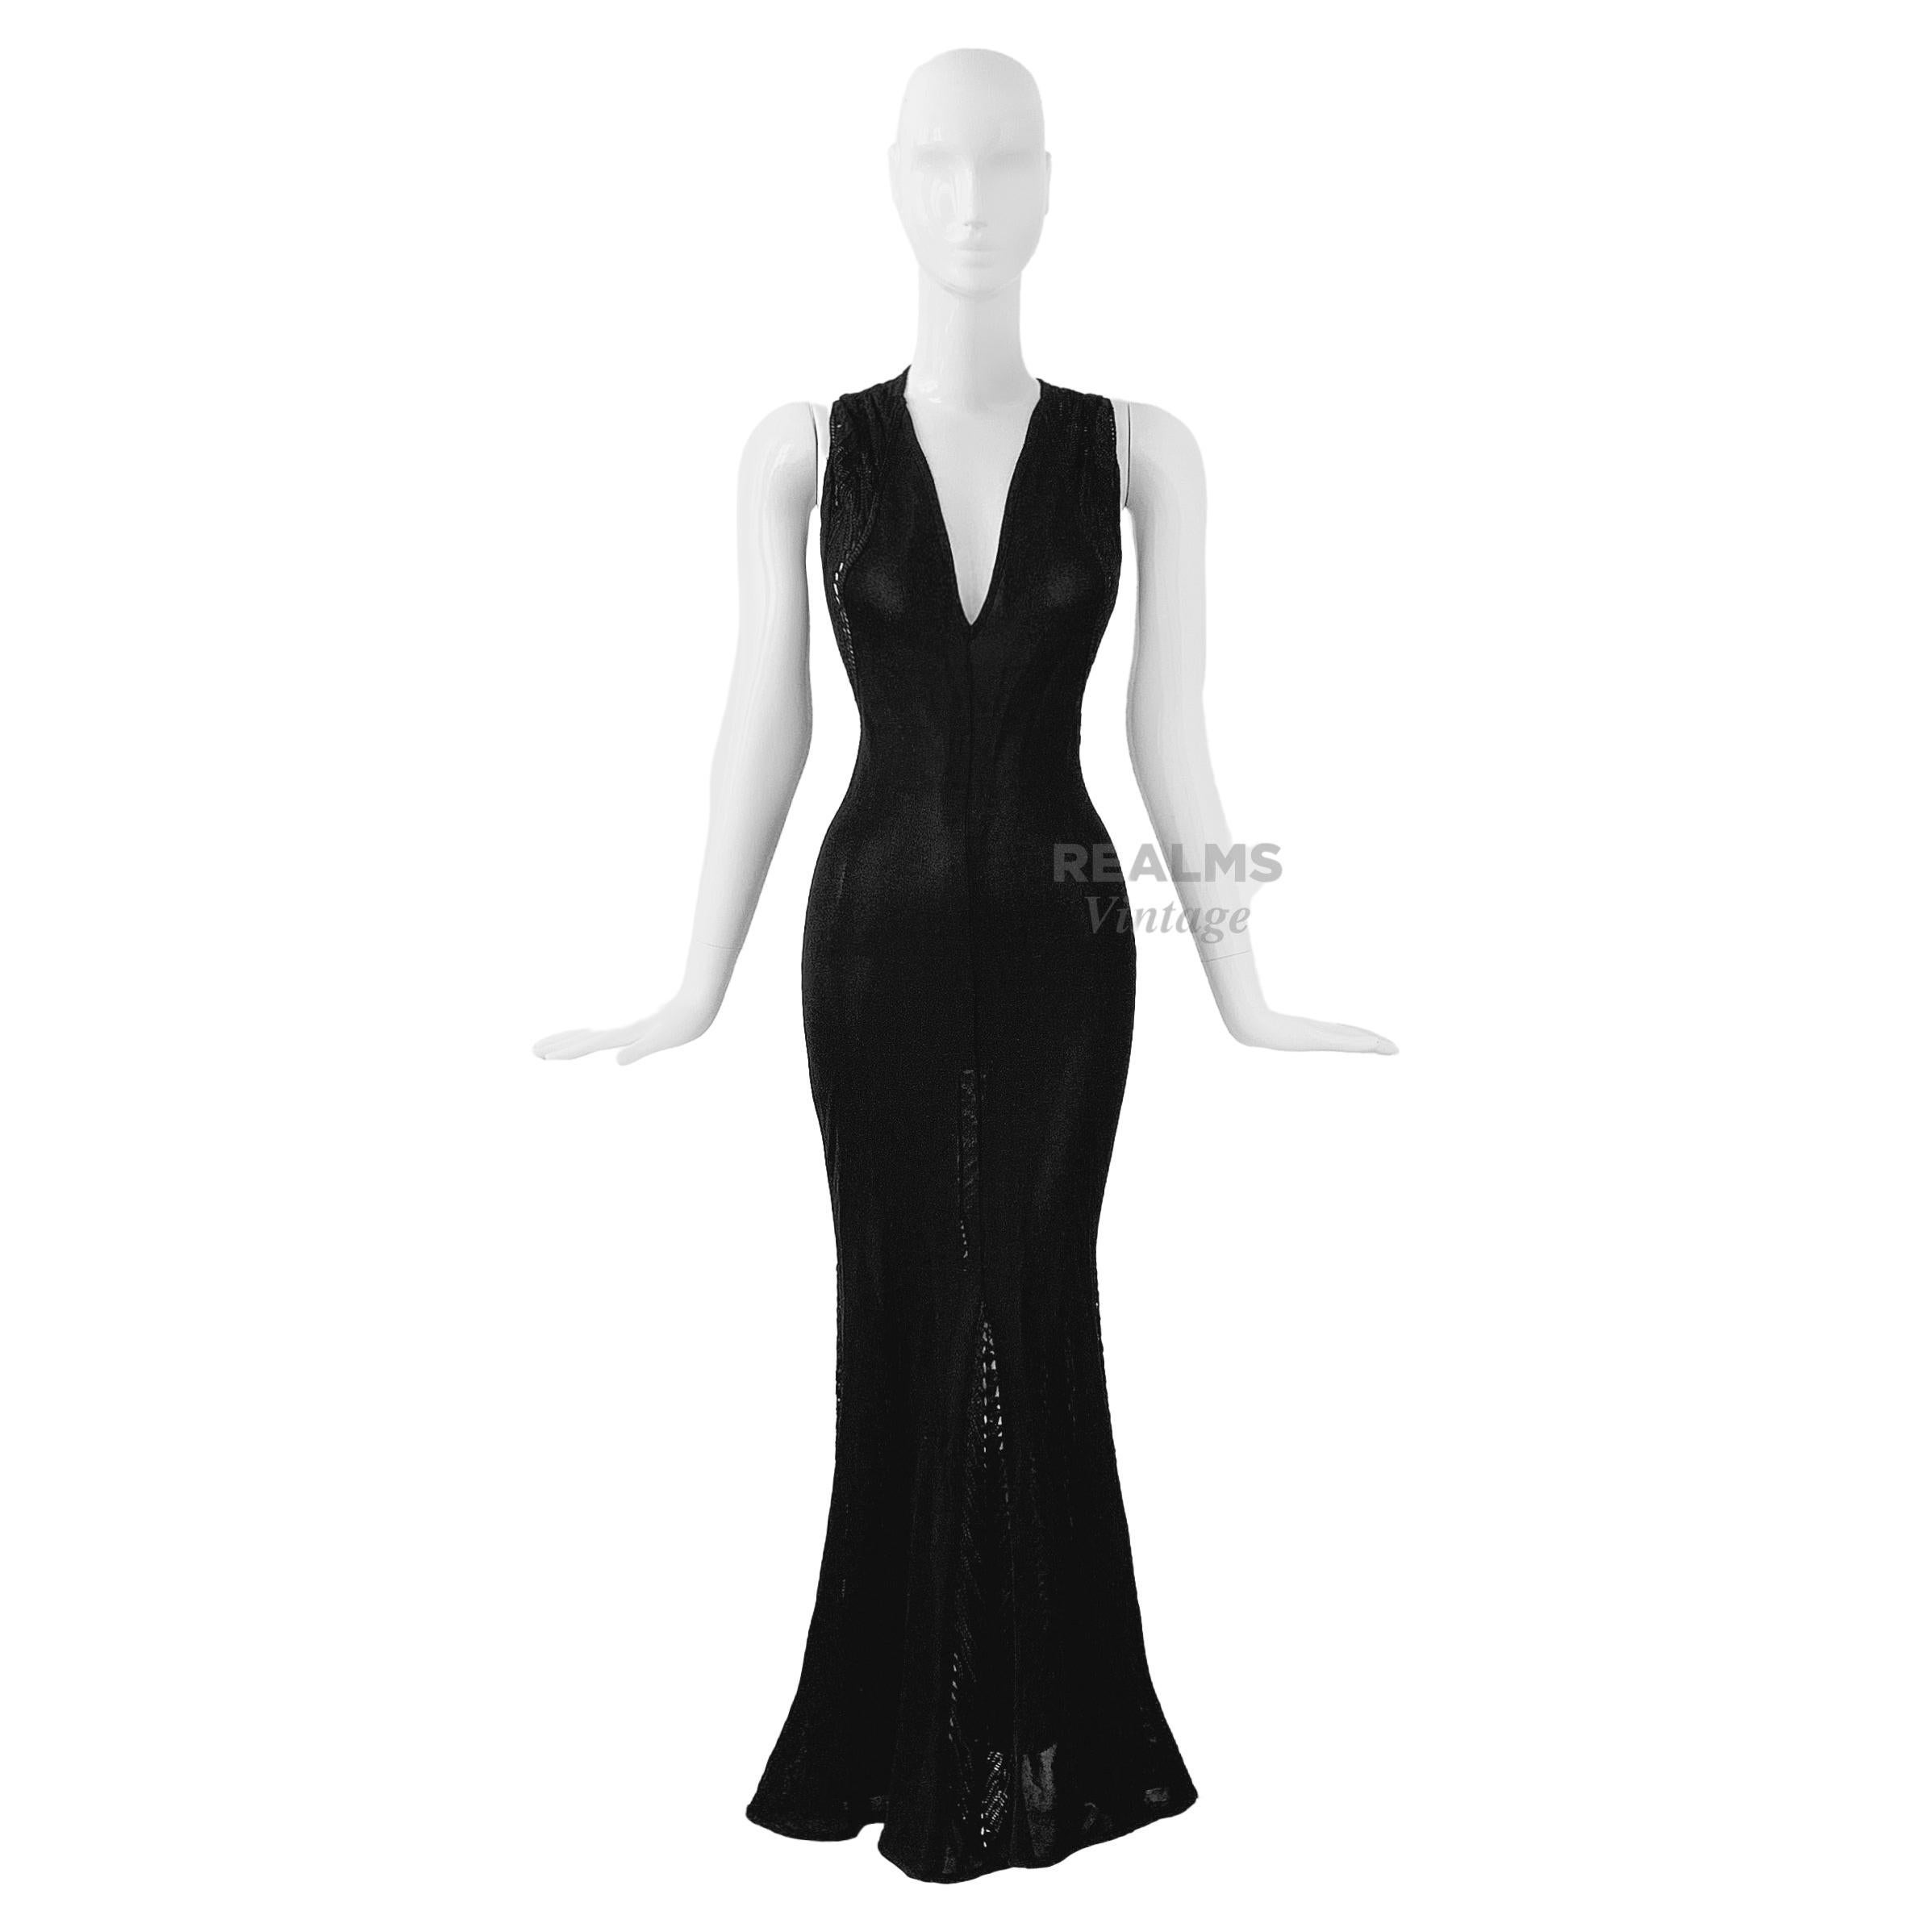 
BOMBSHELL! The perfect gown for an elegant sexy summer evening. Very sexy long maxi dress, bodycon tight fit and mermaid skirt shape on the bottom. The fabric is very light semi sheer black.
Highlight next to this amazing shape are crochet elements